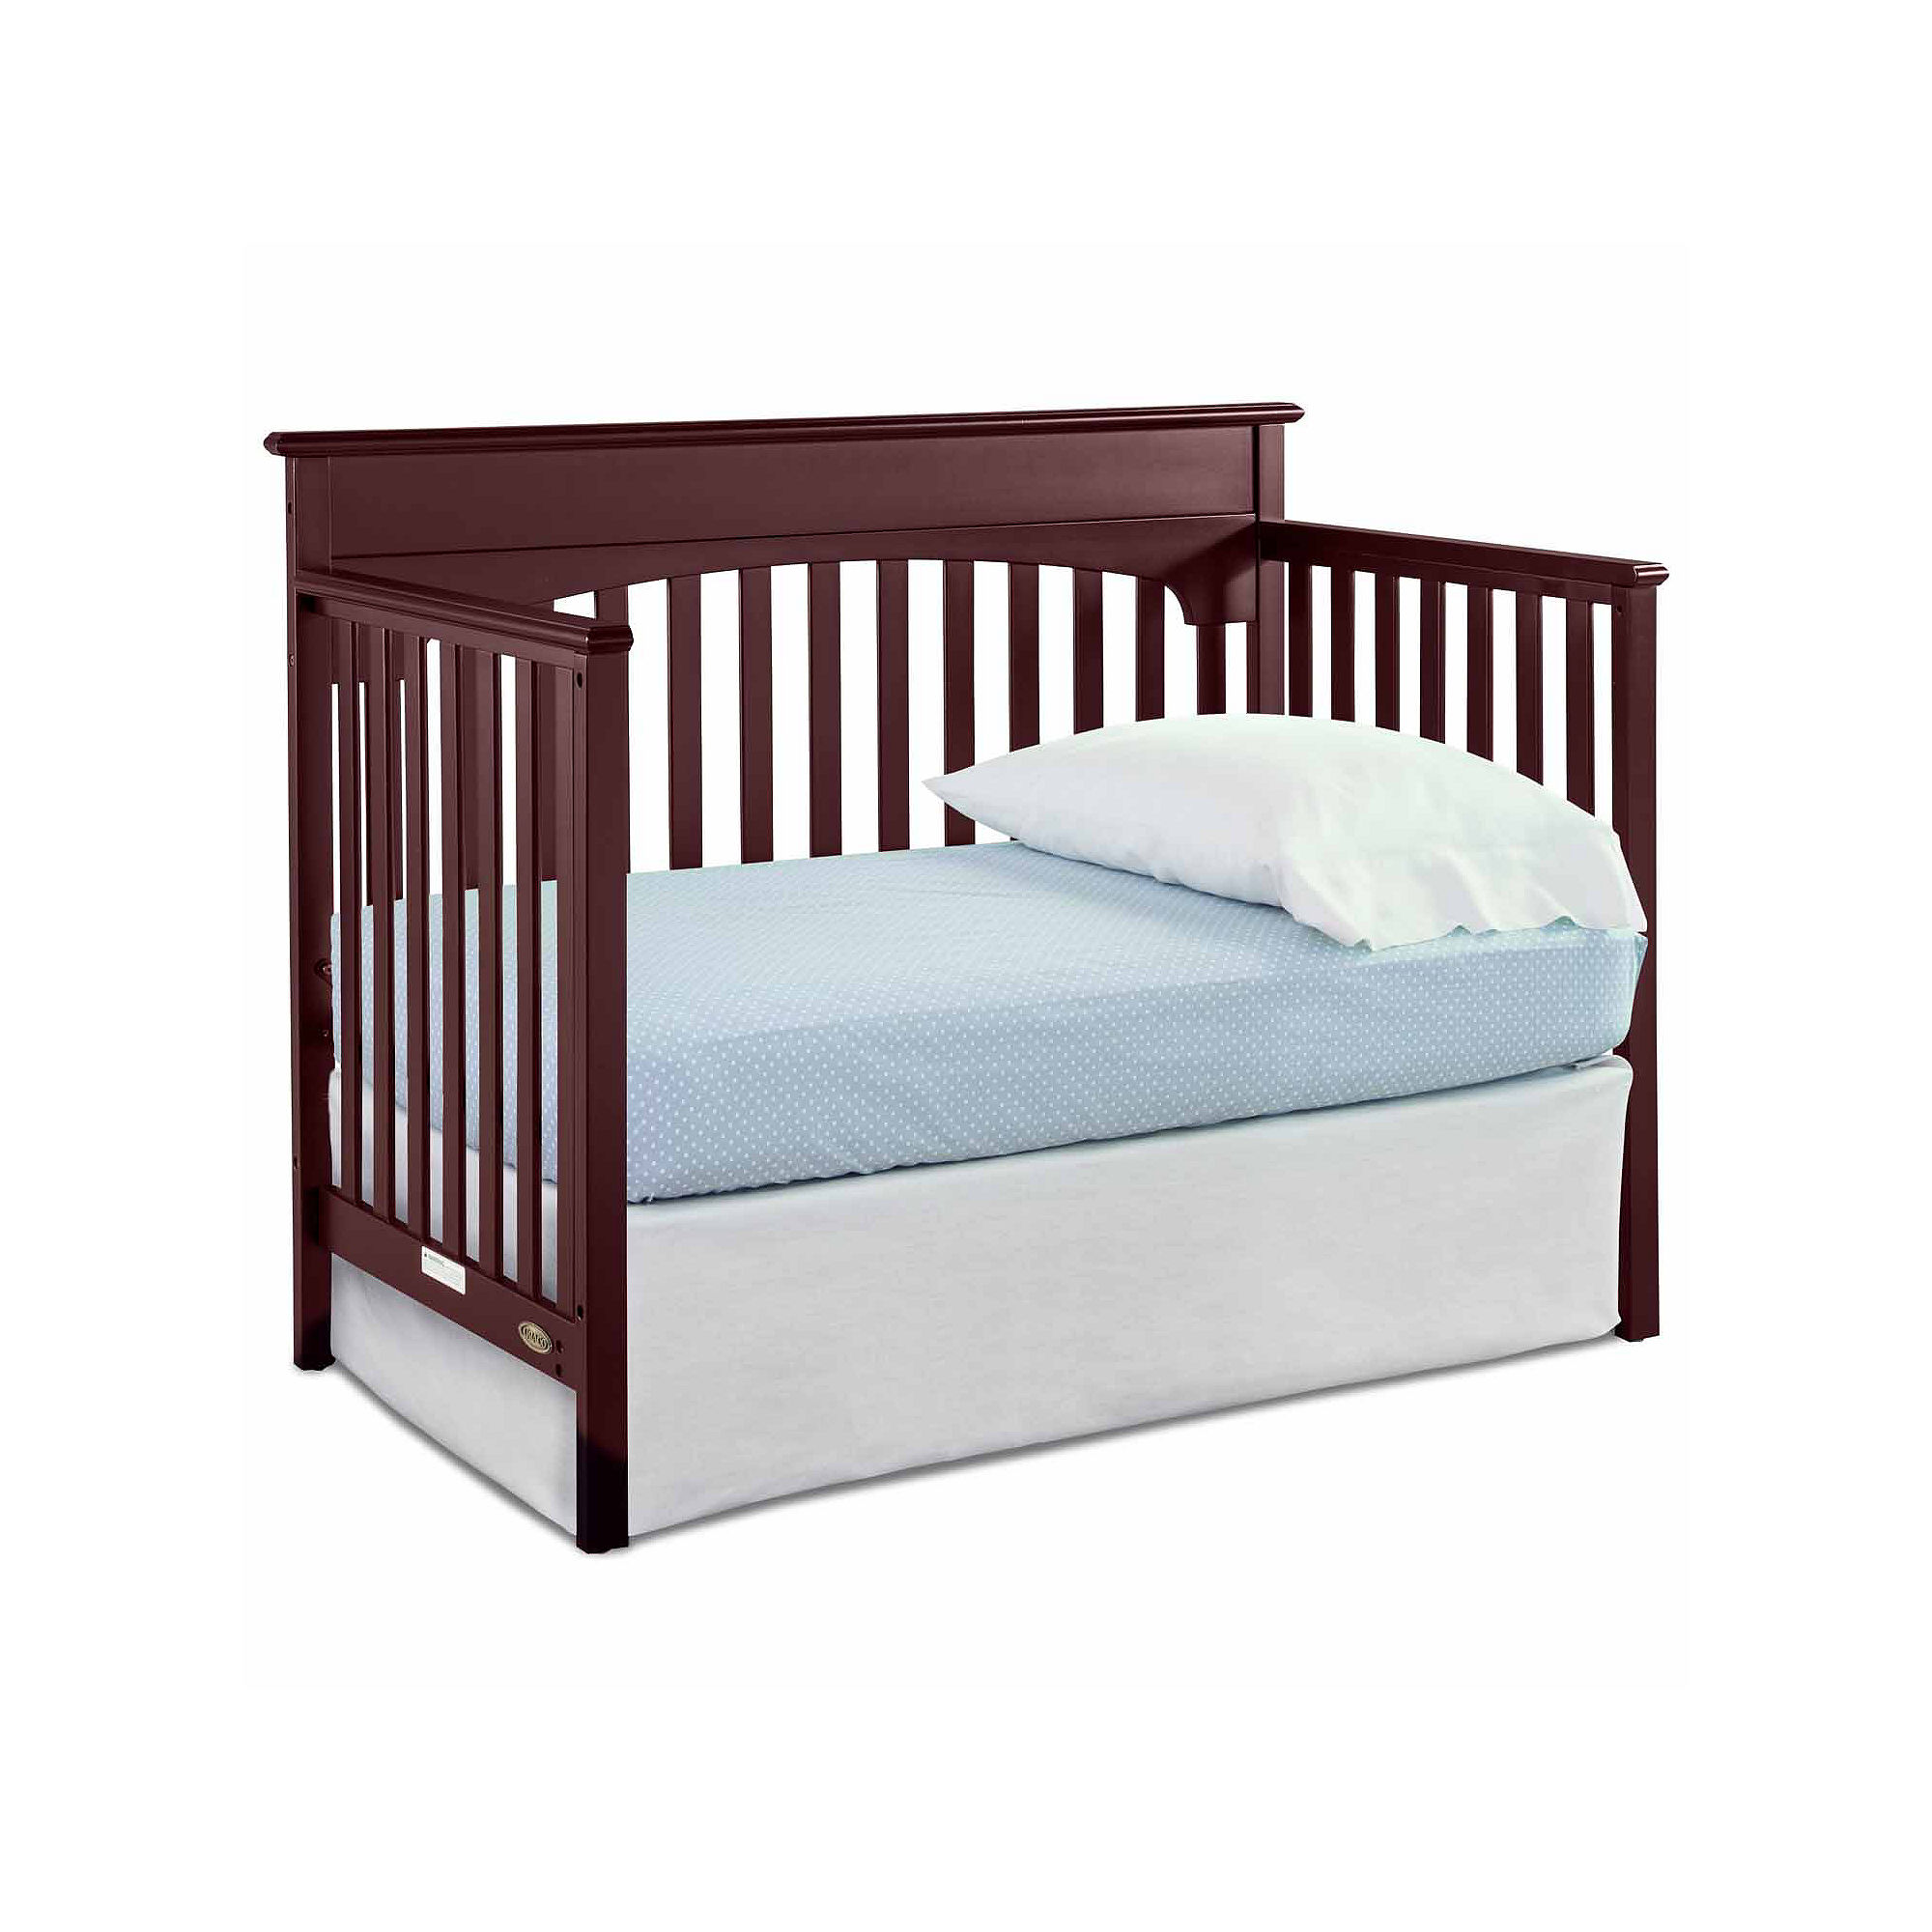 Inspirational Jcpenney Baby Furniture New | Witsolut.com